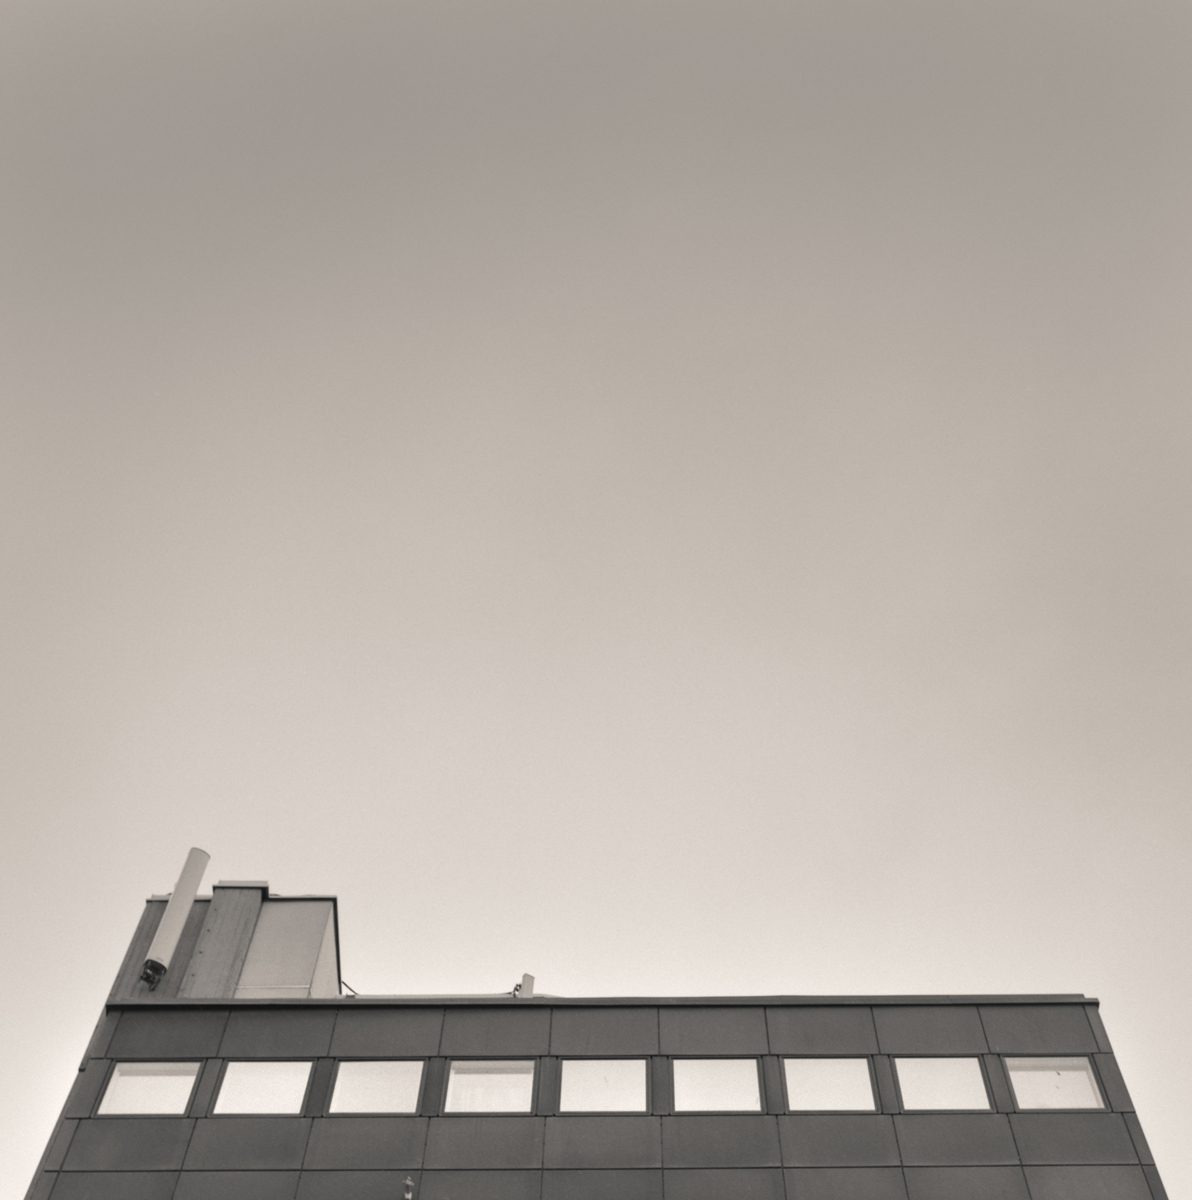 Black and white photograph of buildings looking up from below